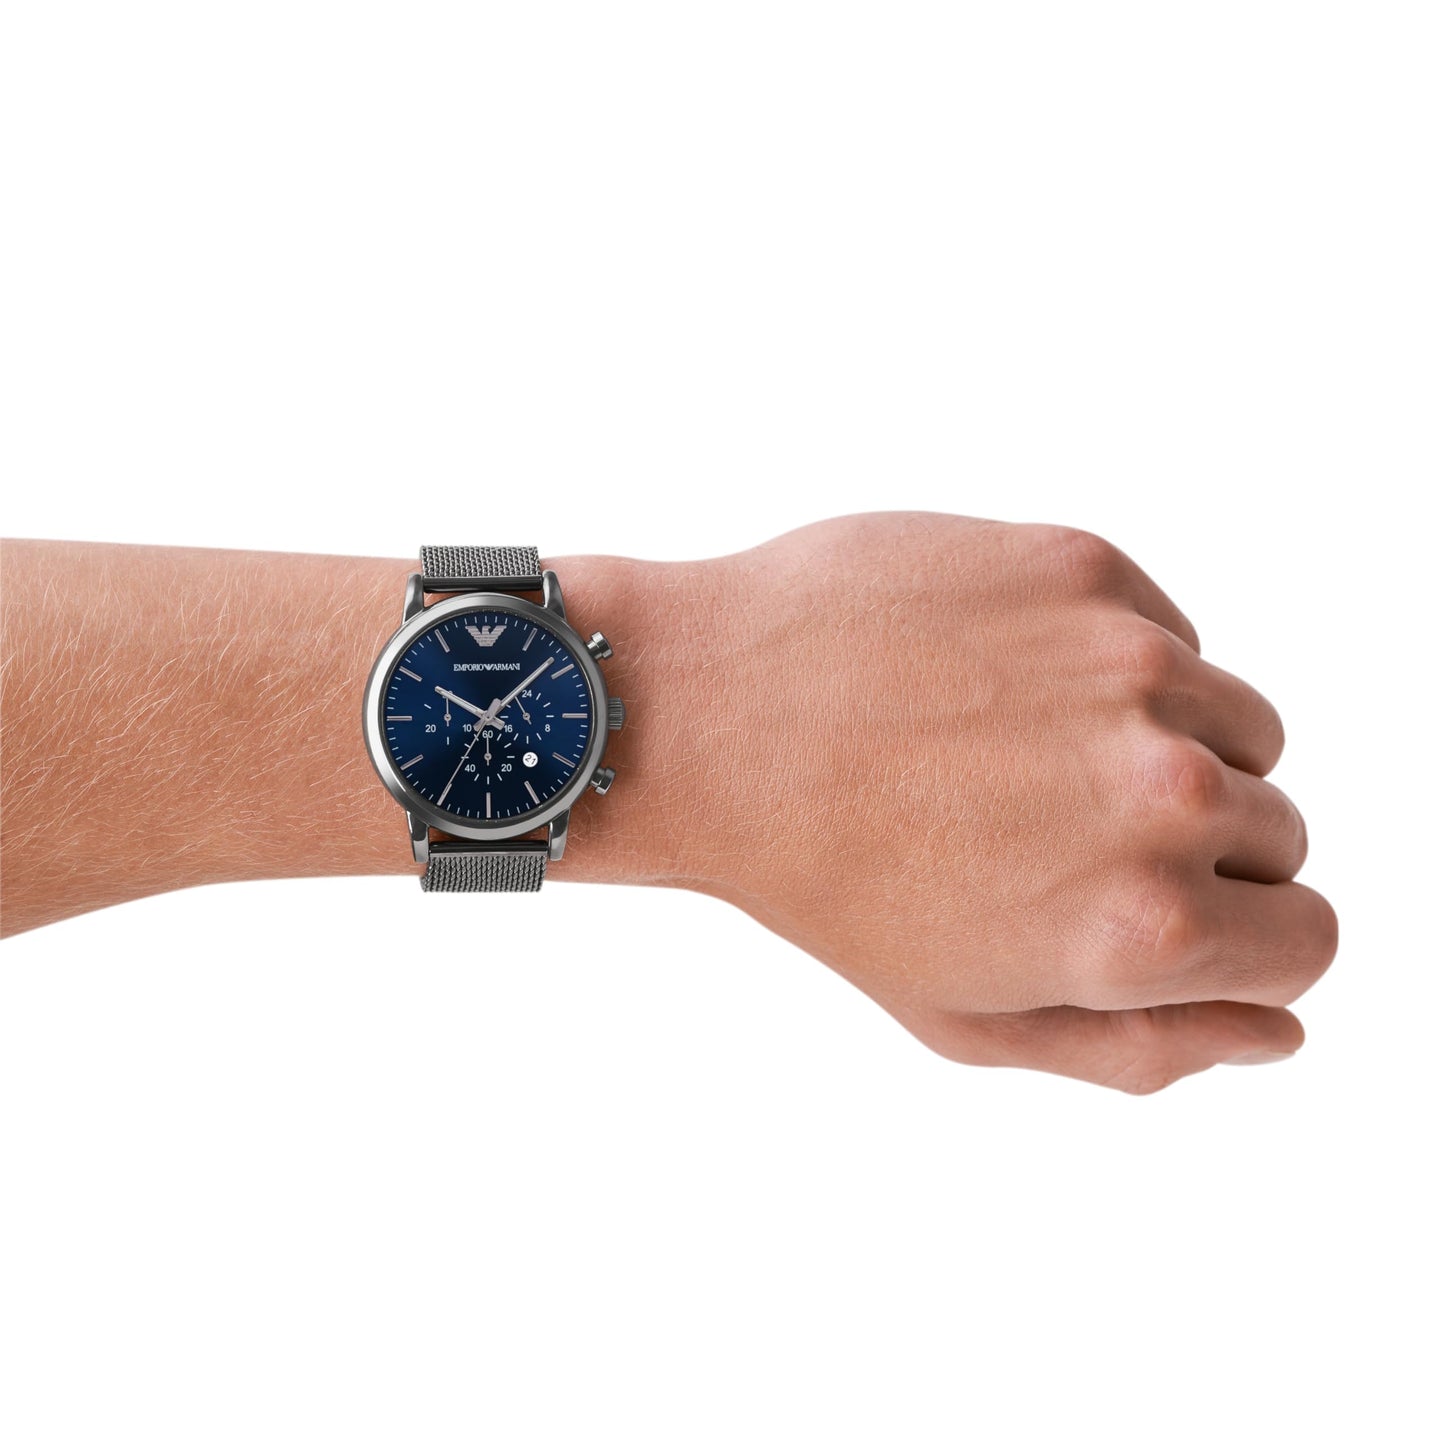 Emporio Armani Analog Blue Dial Men's Watch-Ar1979 - Stainless Steel